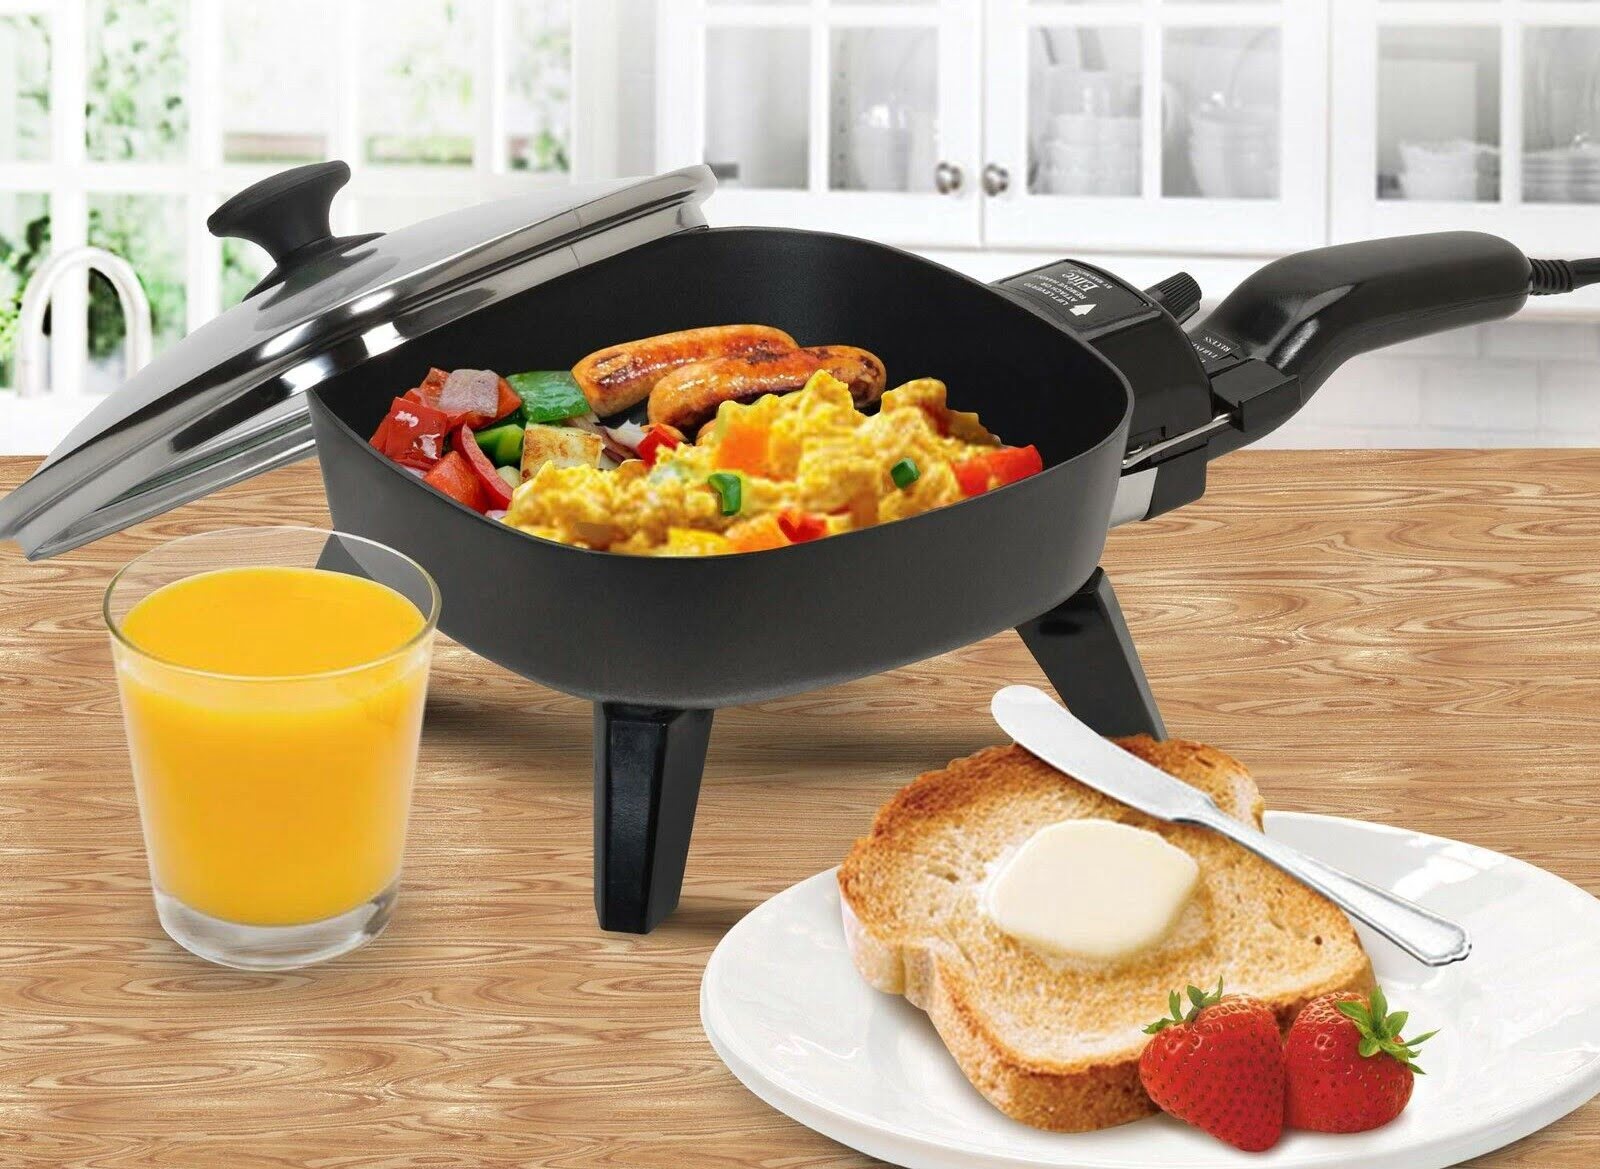 9 Amazing Red Electric Skillet for 2023